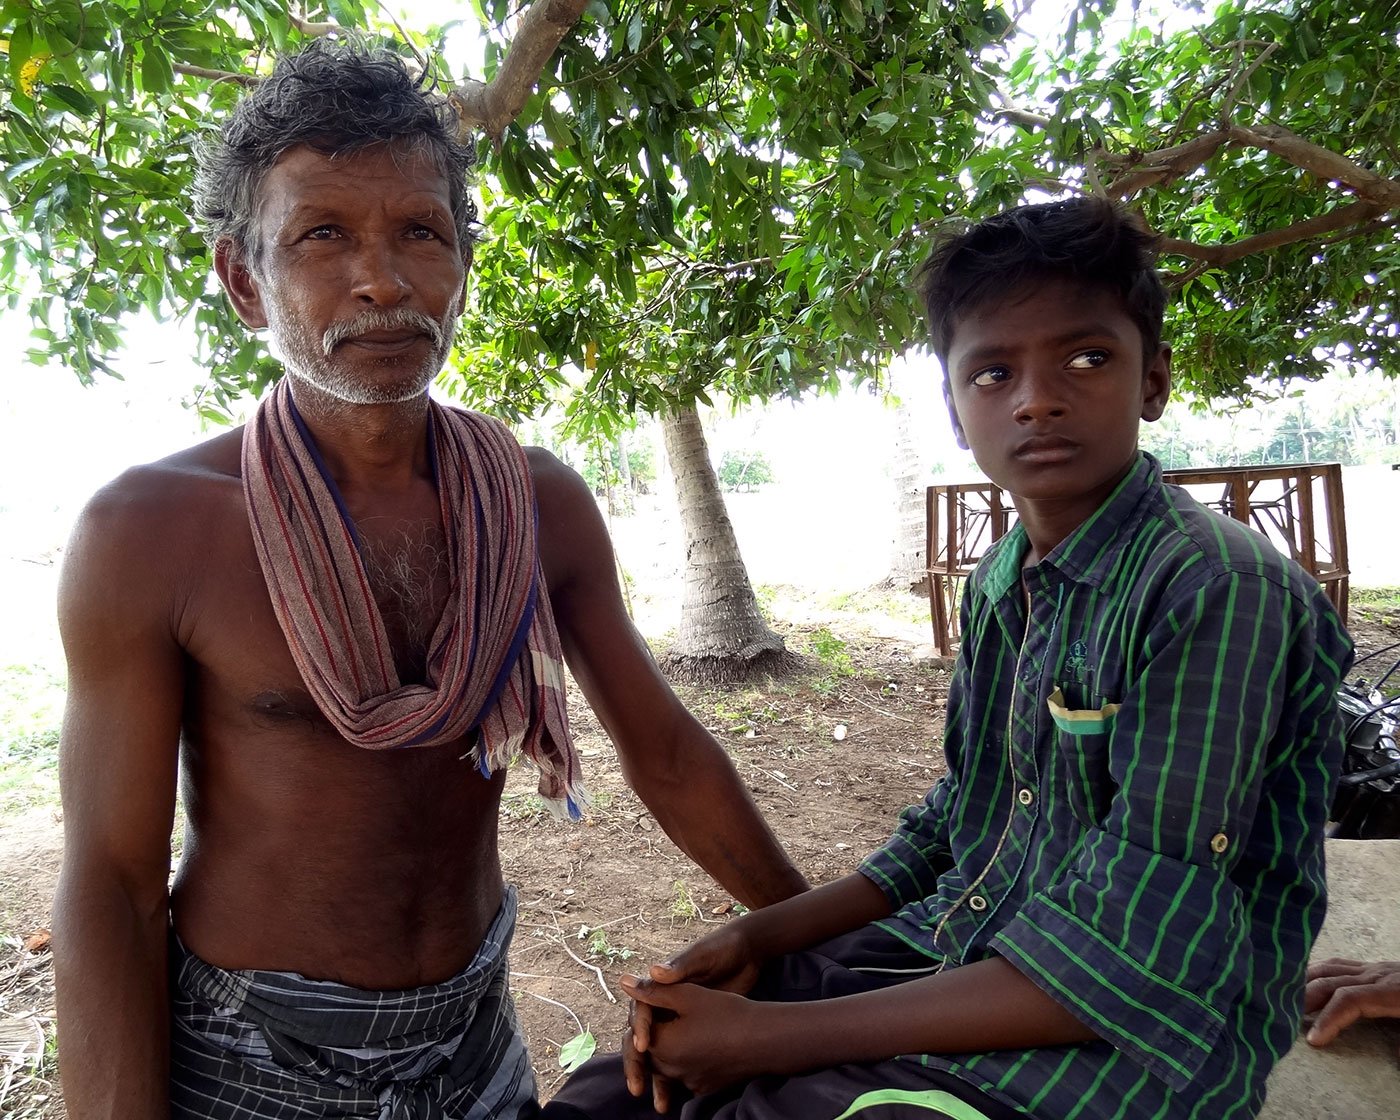 Inbaraj, a fellow-villager, narrates the same story; that of a ravaged farm economy in the Delta drought.